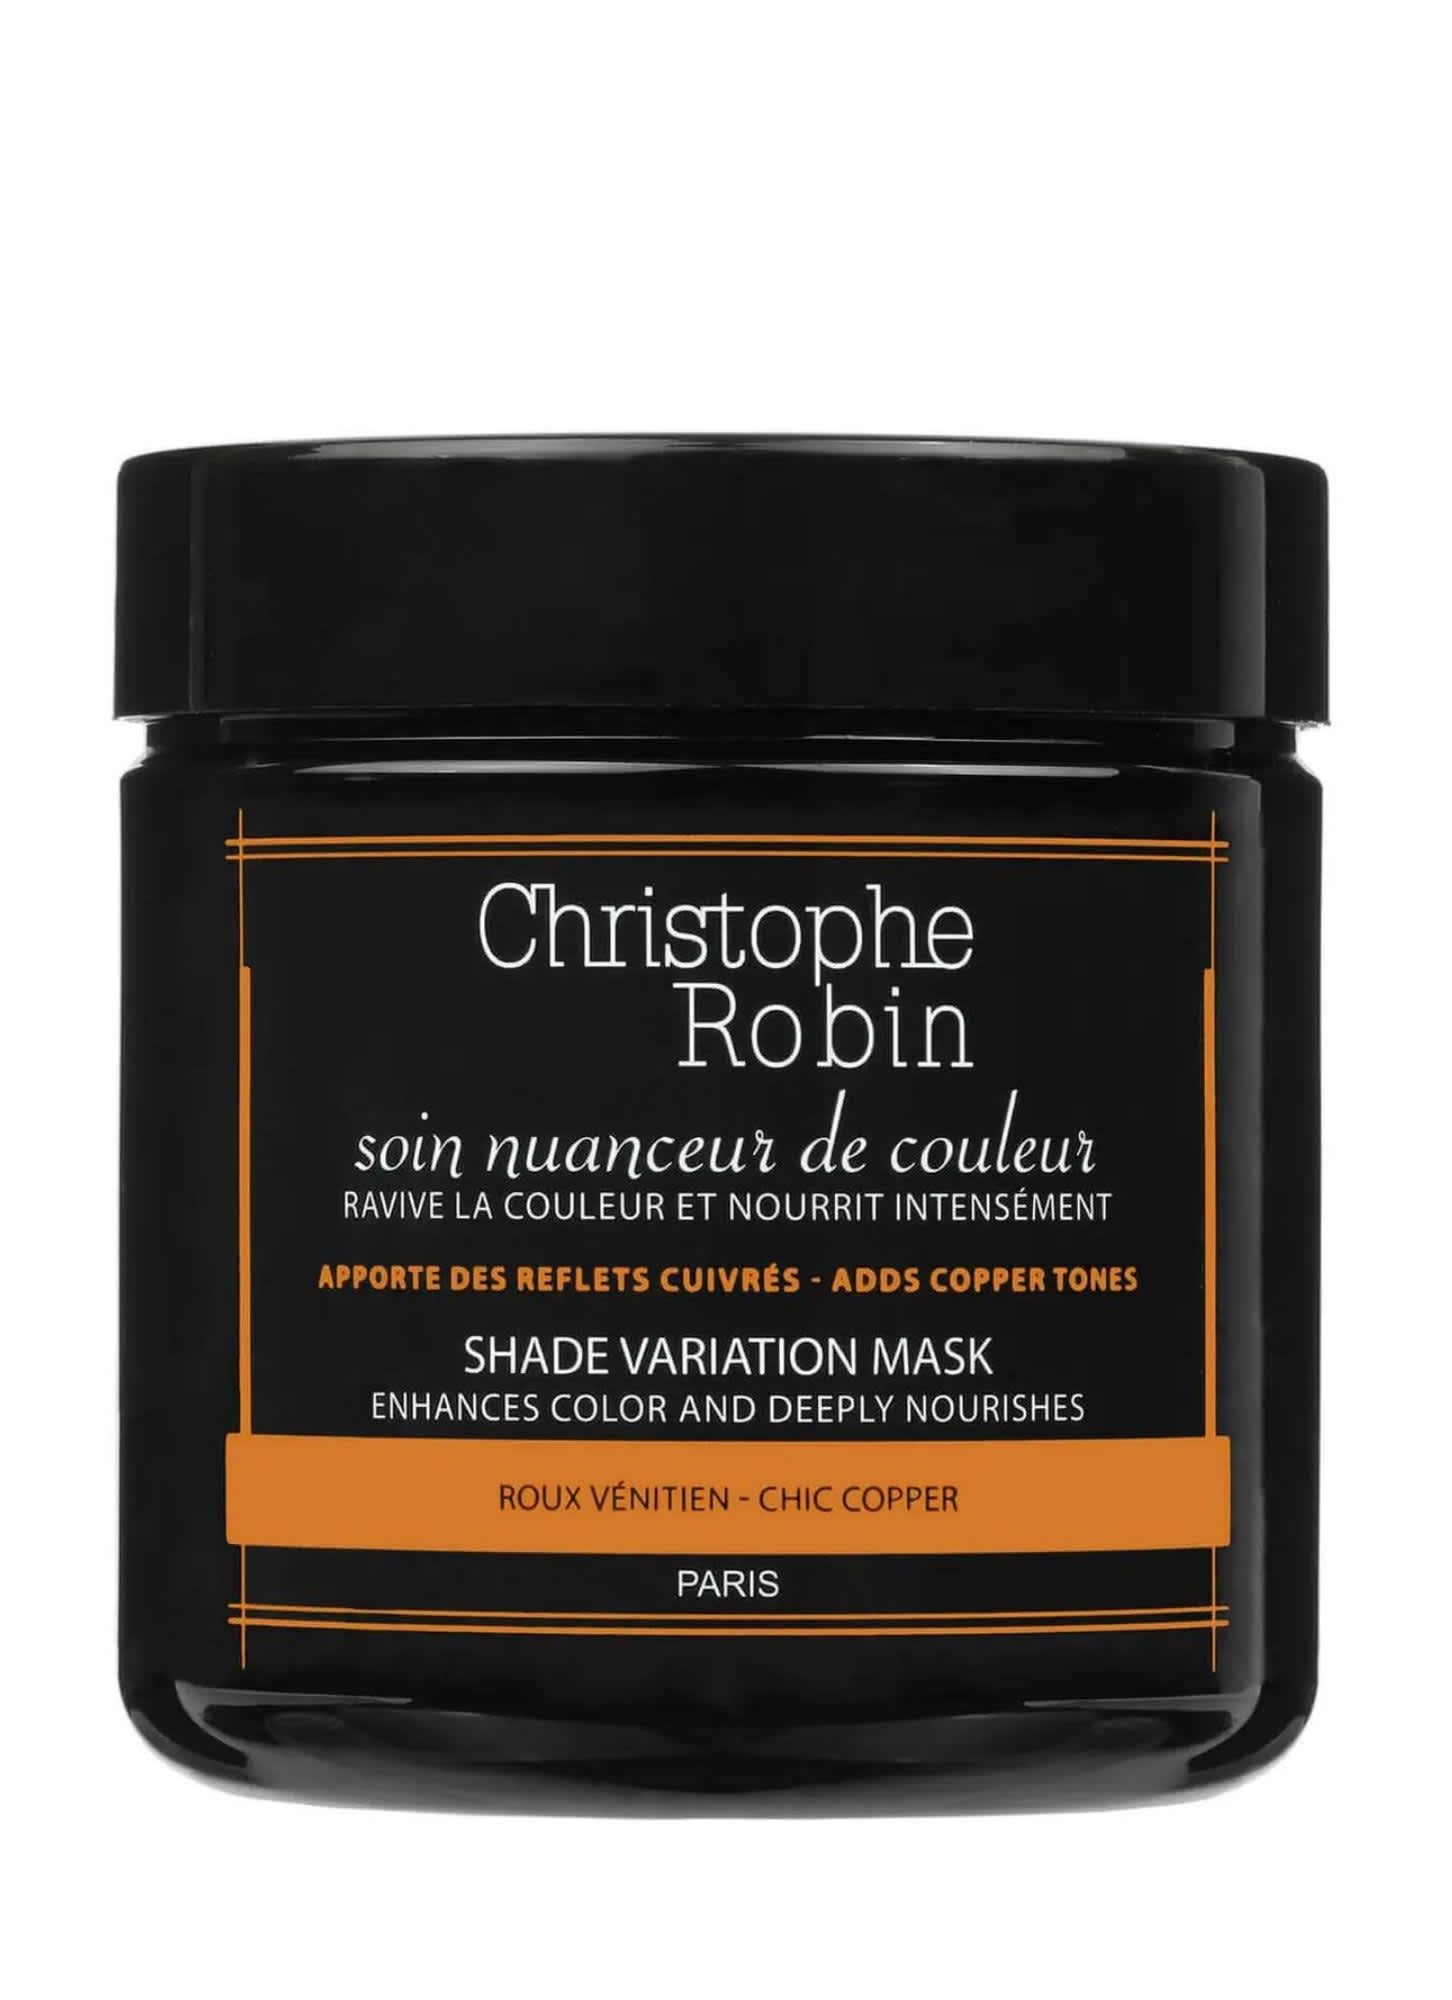 Christophe Robin, Shade Variation Mask in "Chic Copper"